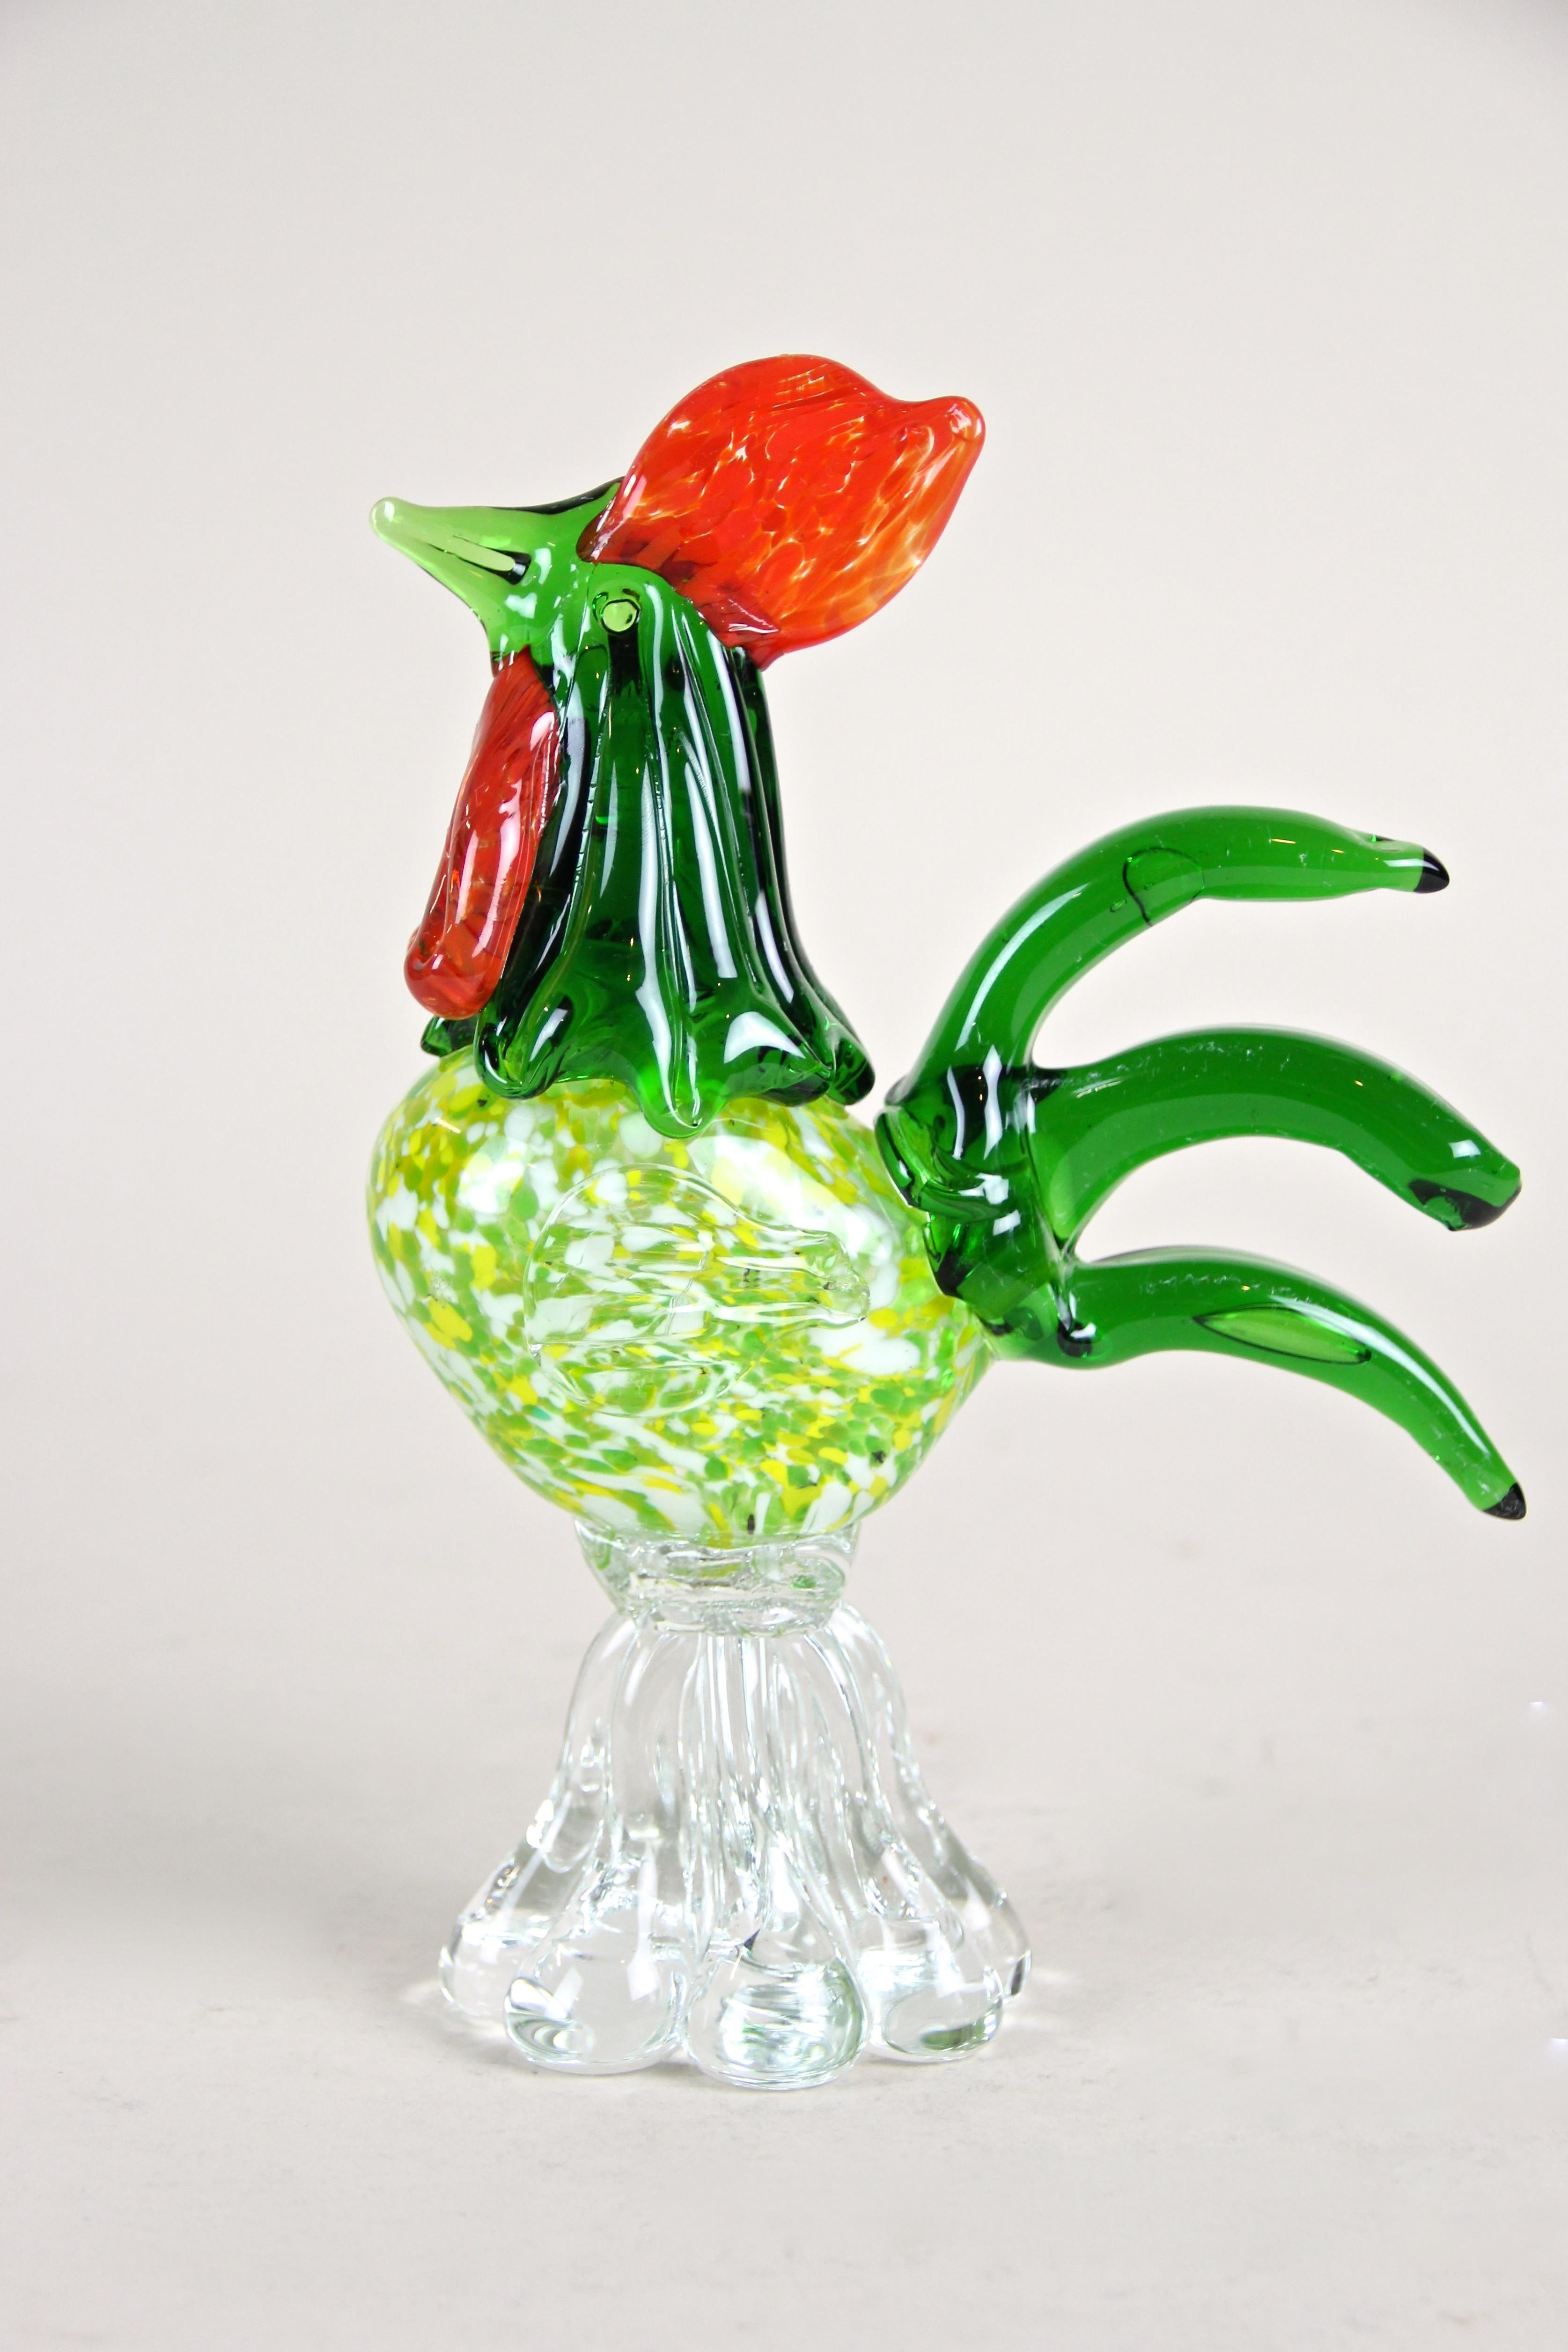 Fantastic handcrafted midcentury Murano glass art cock out of the renown Murano workshops in Italy from circa 1950. The multicolored in-glas worked body shows beautiful green and yellow tones and just looks gorgeous. Standing on a clear glass base